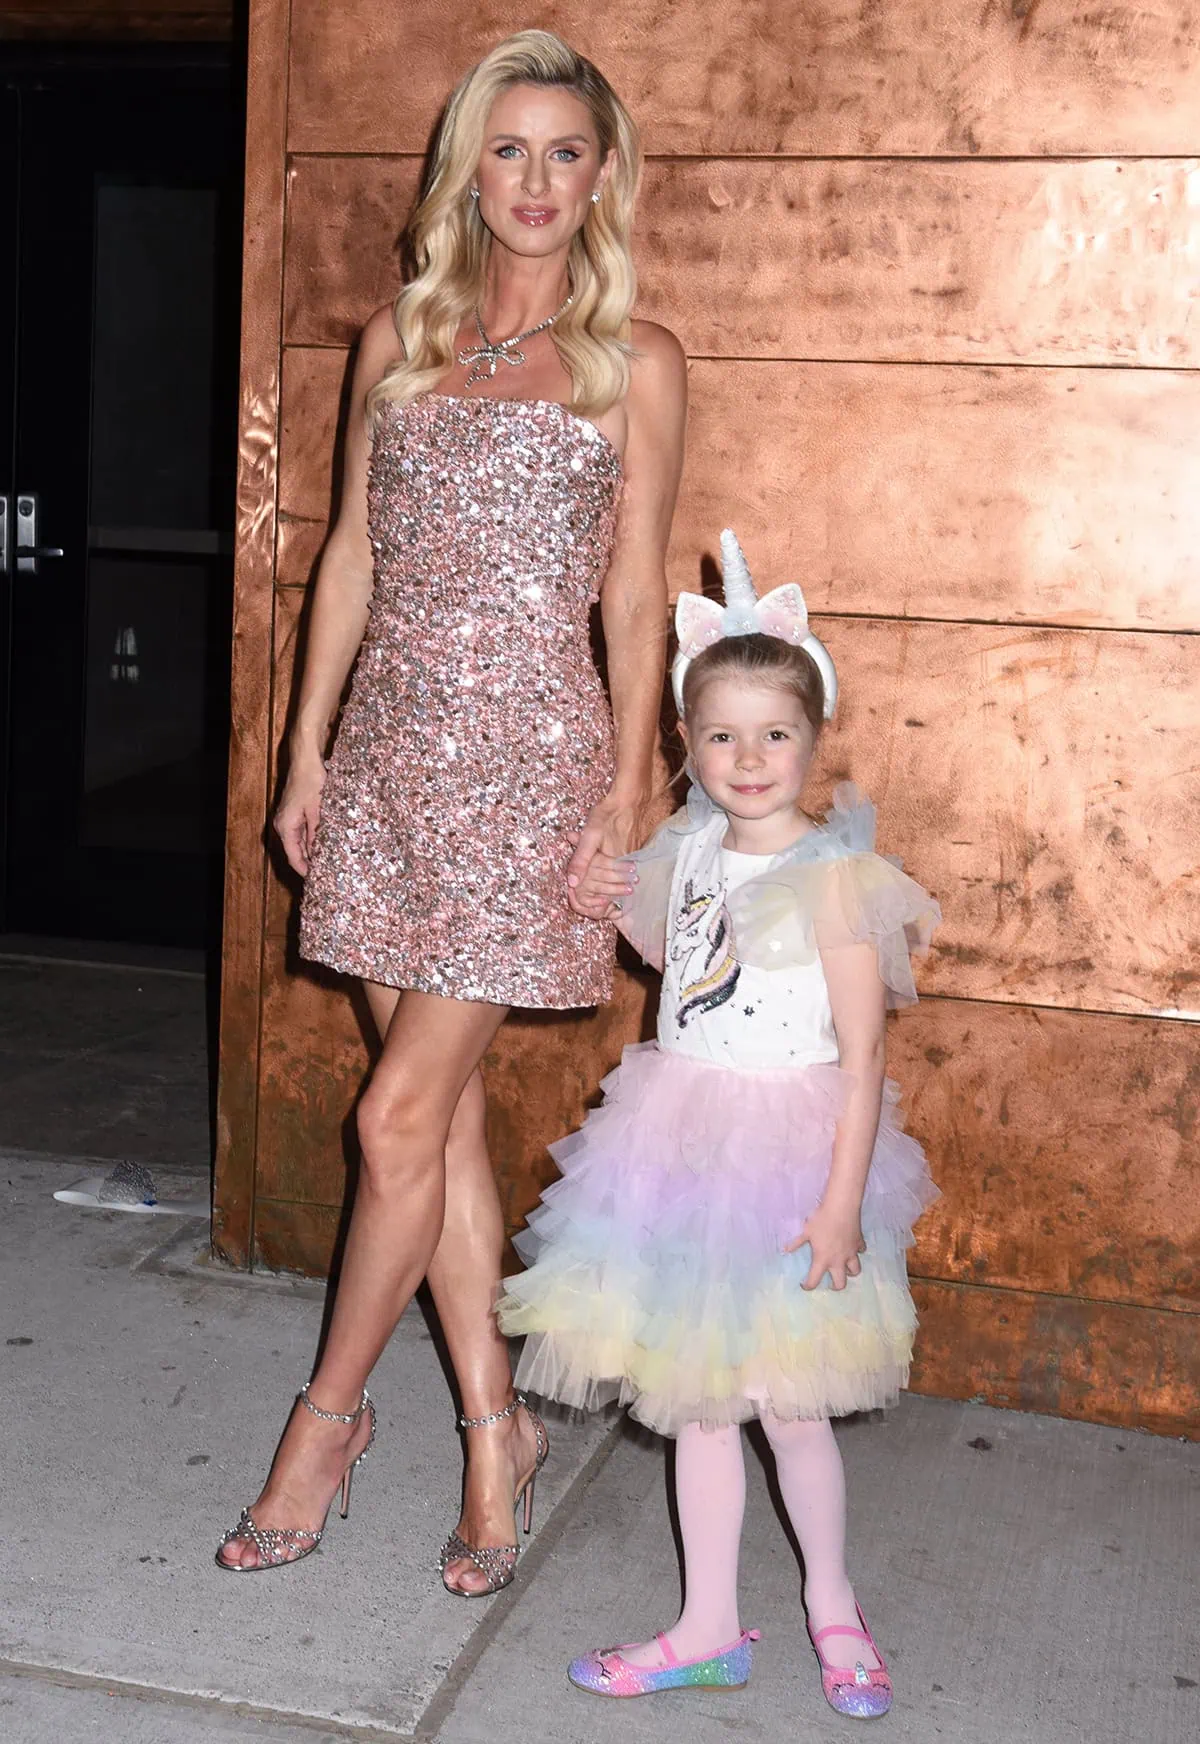 Nicky Hilton wears a glittery pink strapless mini dress by Alice + Olivia as she celebrates the LGBTQIA+ community with her daughter Teddy at Stacey Bendet’s annual Pride party in New York City